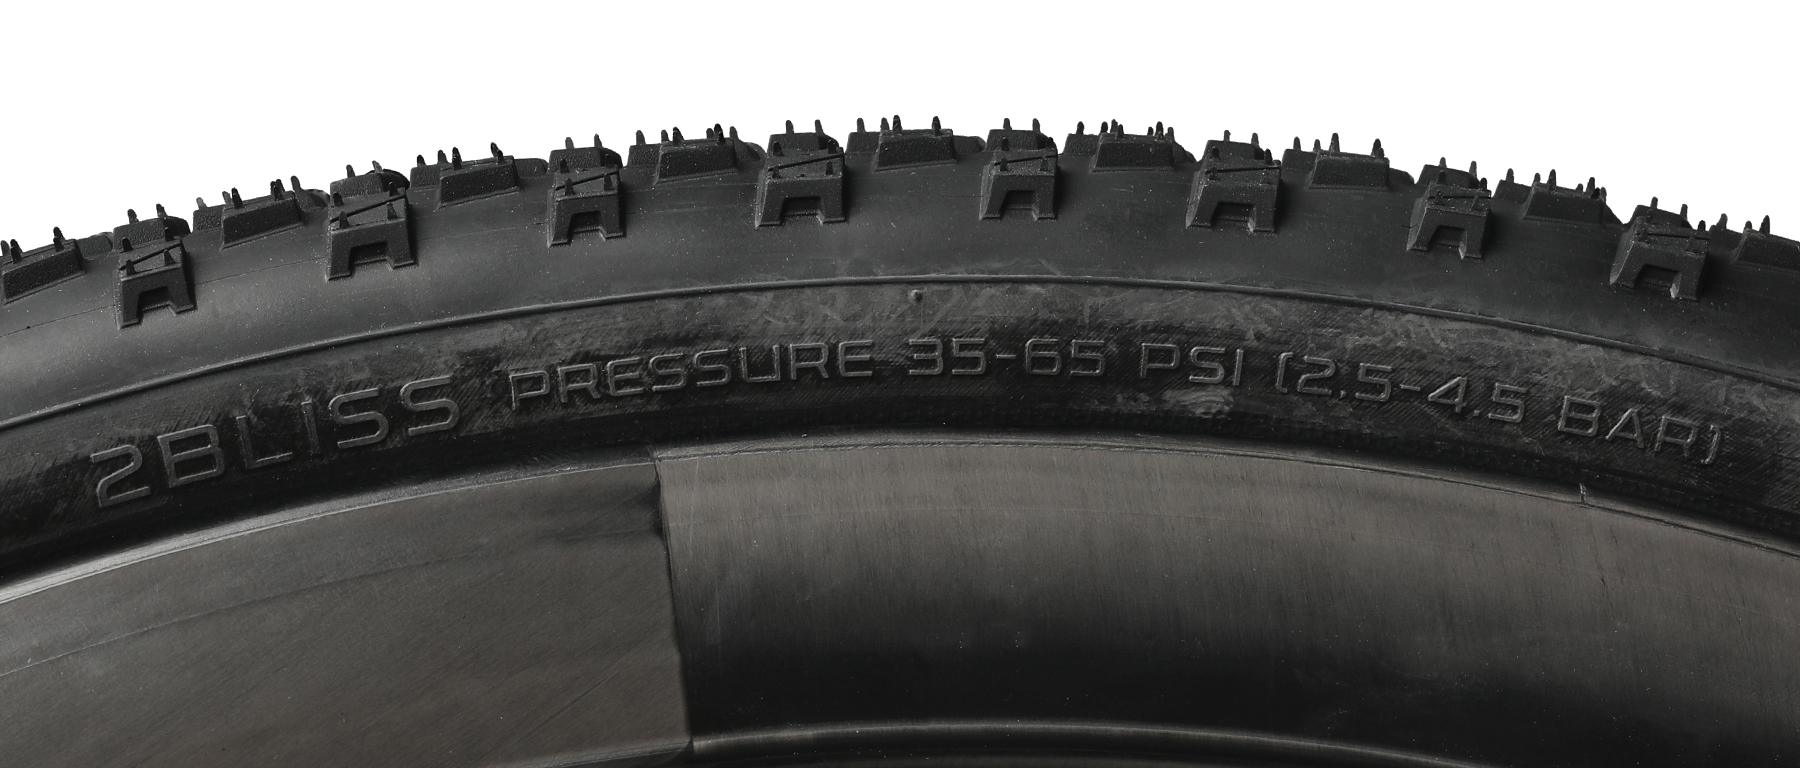 Specialized Rhombus Pro 2Bliss Gravel Tire